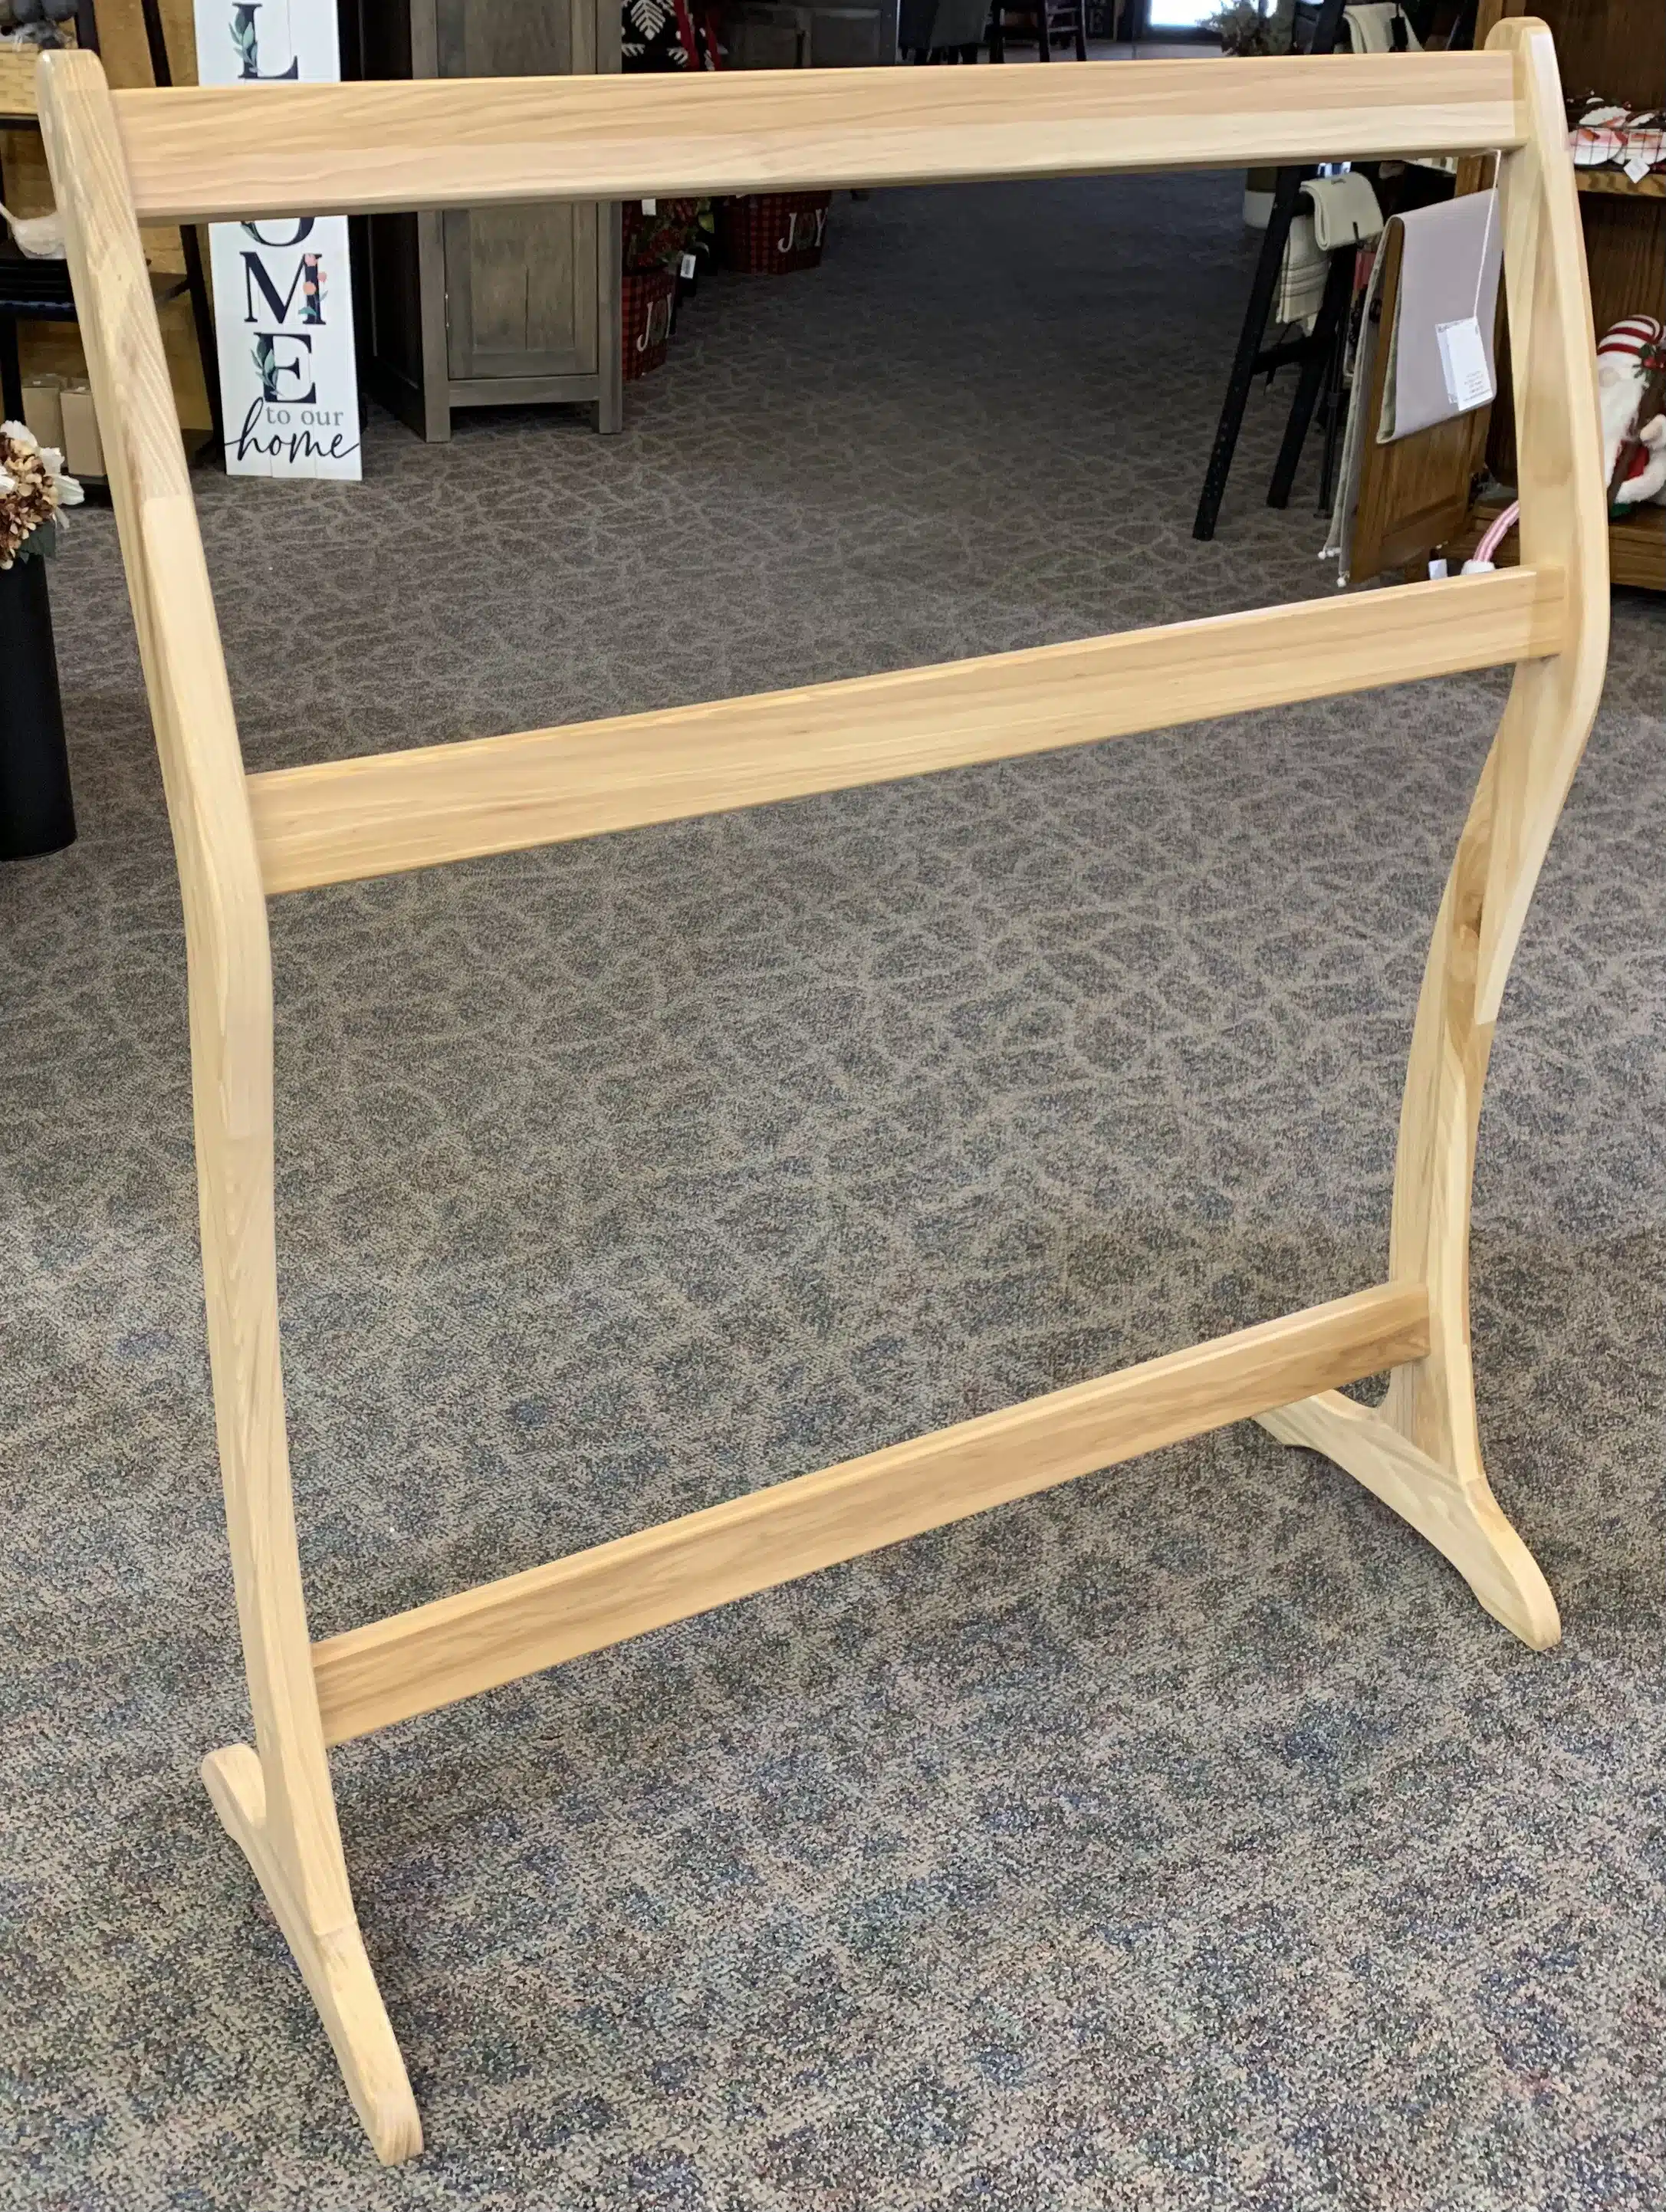 Brown Maple Quilt Rack with Shelf, Coffee